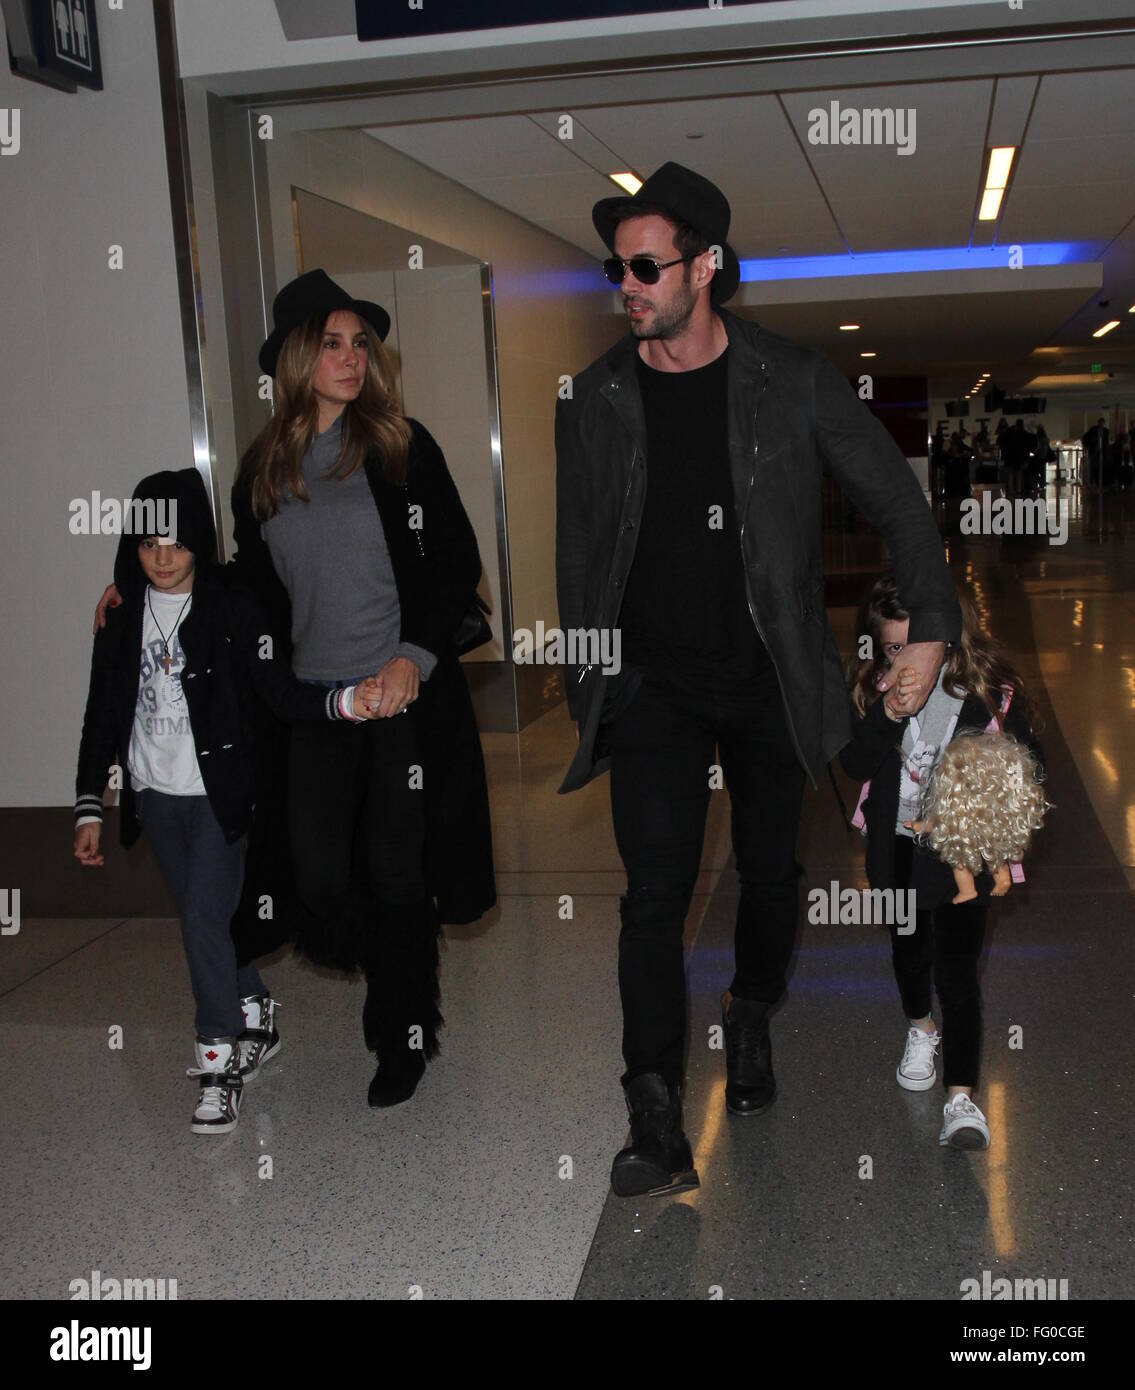 journalist jeans tårn William Levy arrives at Los Angeles International Airport (LAX) with  Elizabeth Gutierrez and their children, Christopher and Kailey Featuring: William  Levy, Elizabeth Gutiérrez, Christopher Alexander Levy, Kailey Alexandra Levy  Where: Los Angeles,